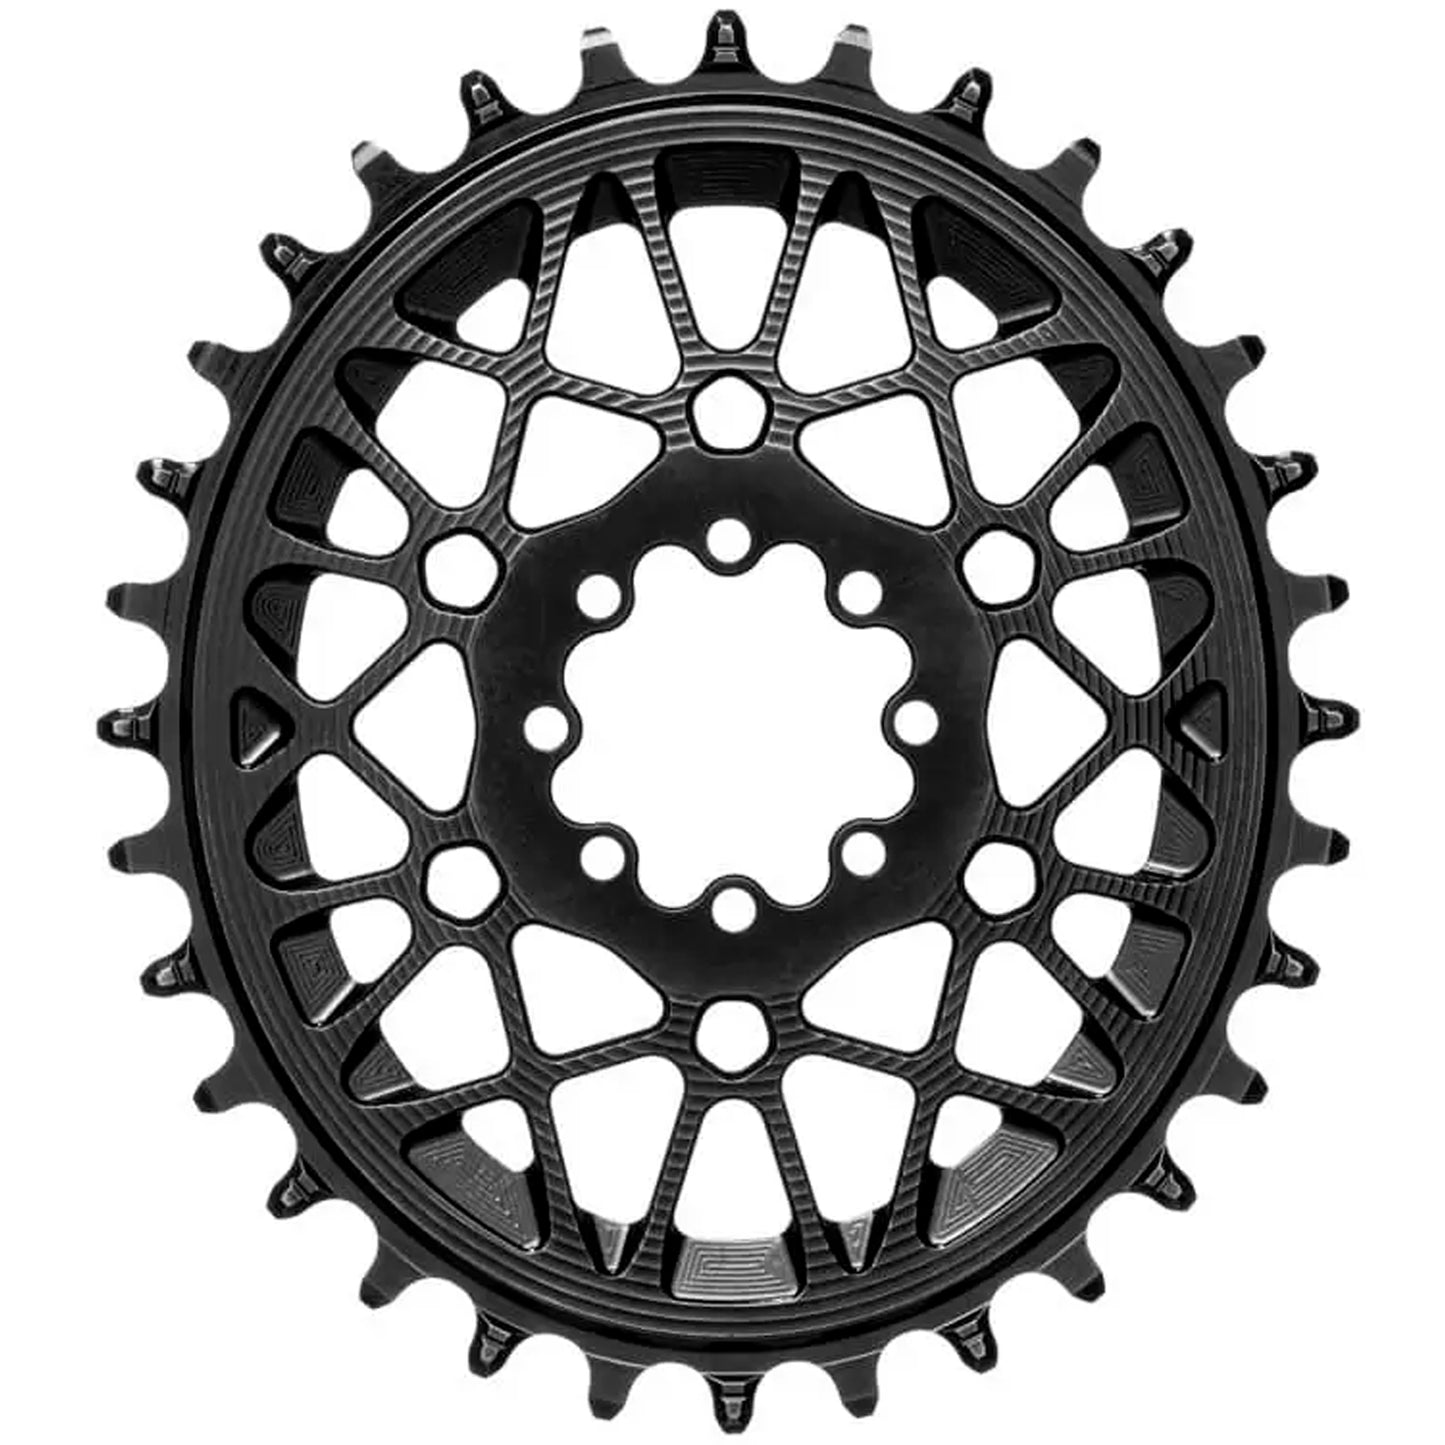 Absolute Black Oval SRAM T-Type DM 8-Hole Boost Chainring 34T Blk